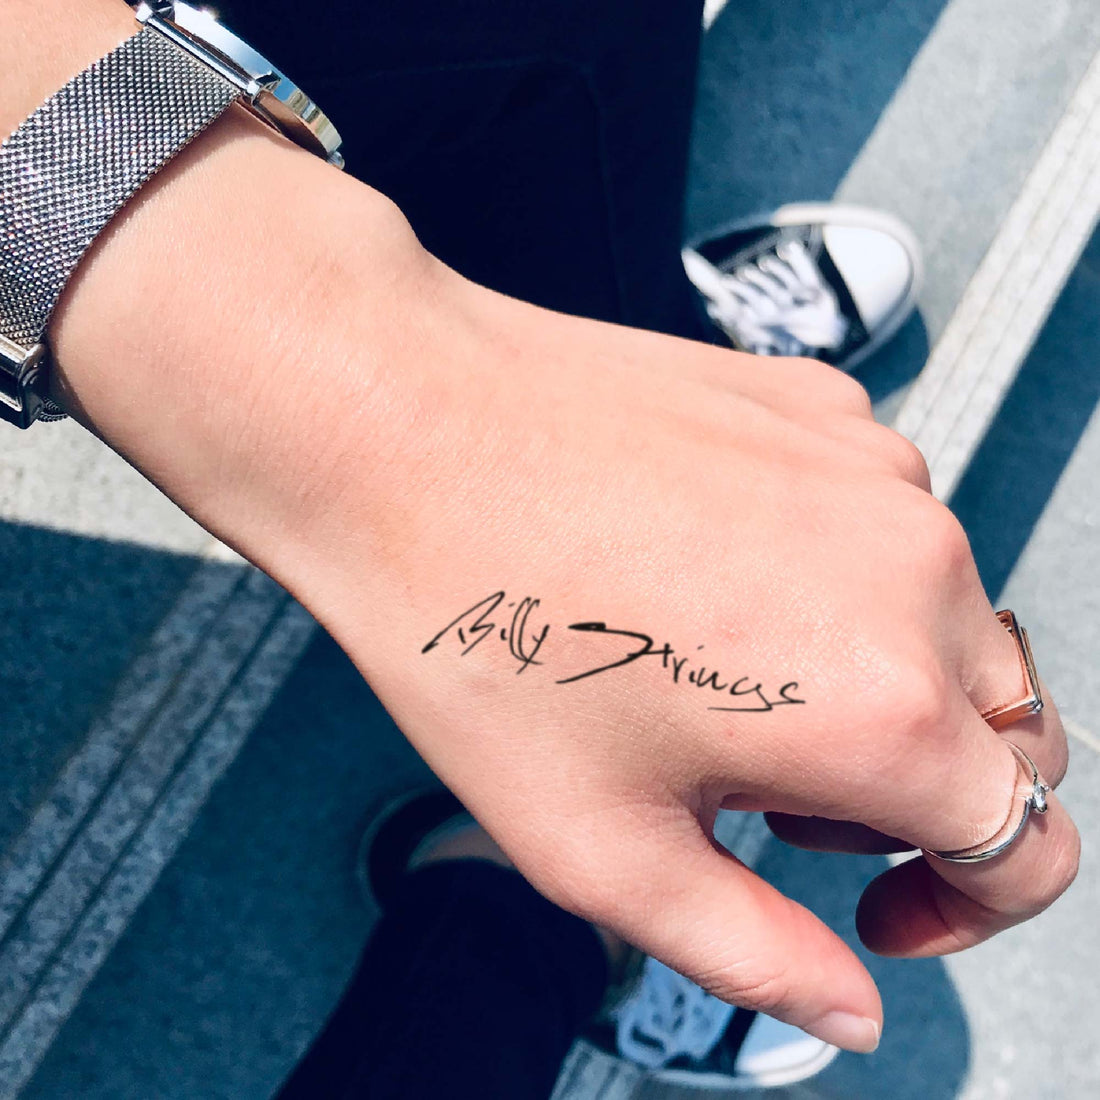 Billy Strings custom temporary tattoo sticker design idea inspiration meanings removal arm wrist hand words font name signature calligraphy lyrics tour concert outfits merch accessory gift souvenir costumes wear dress up code